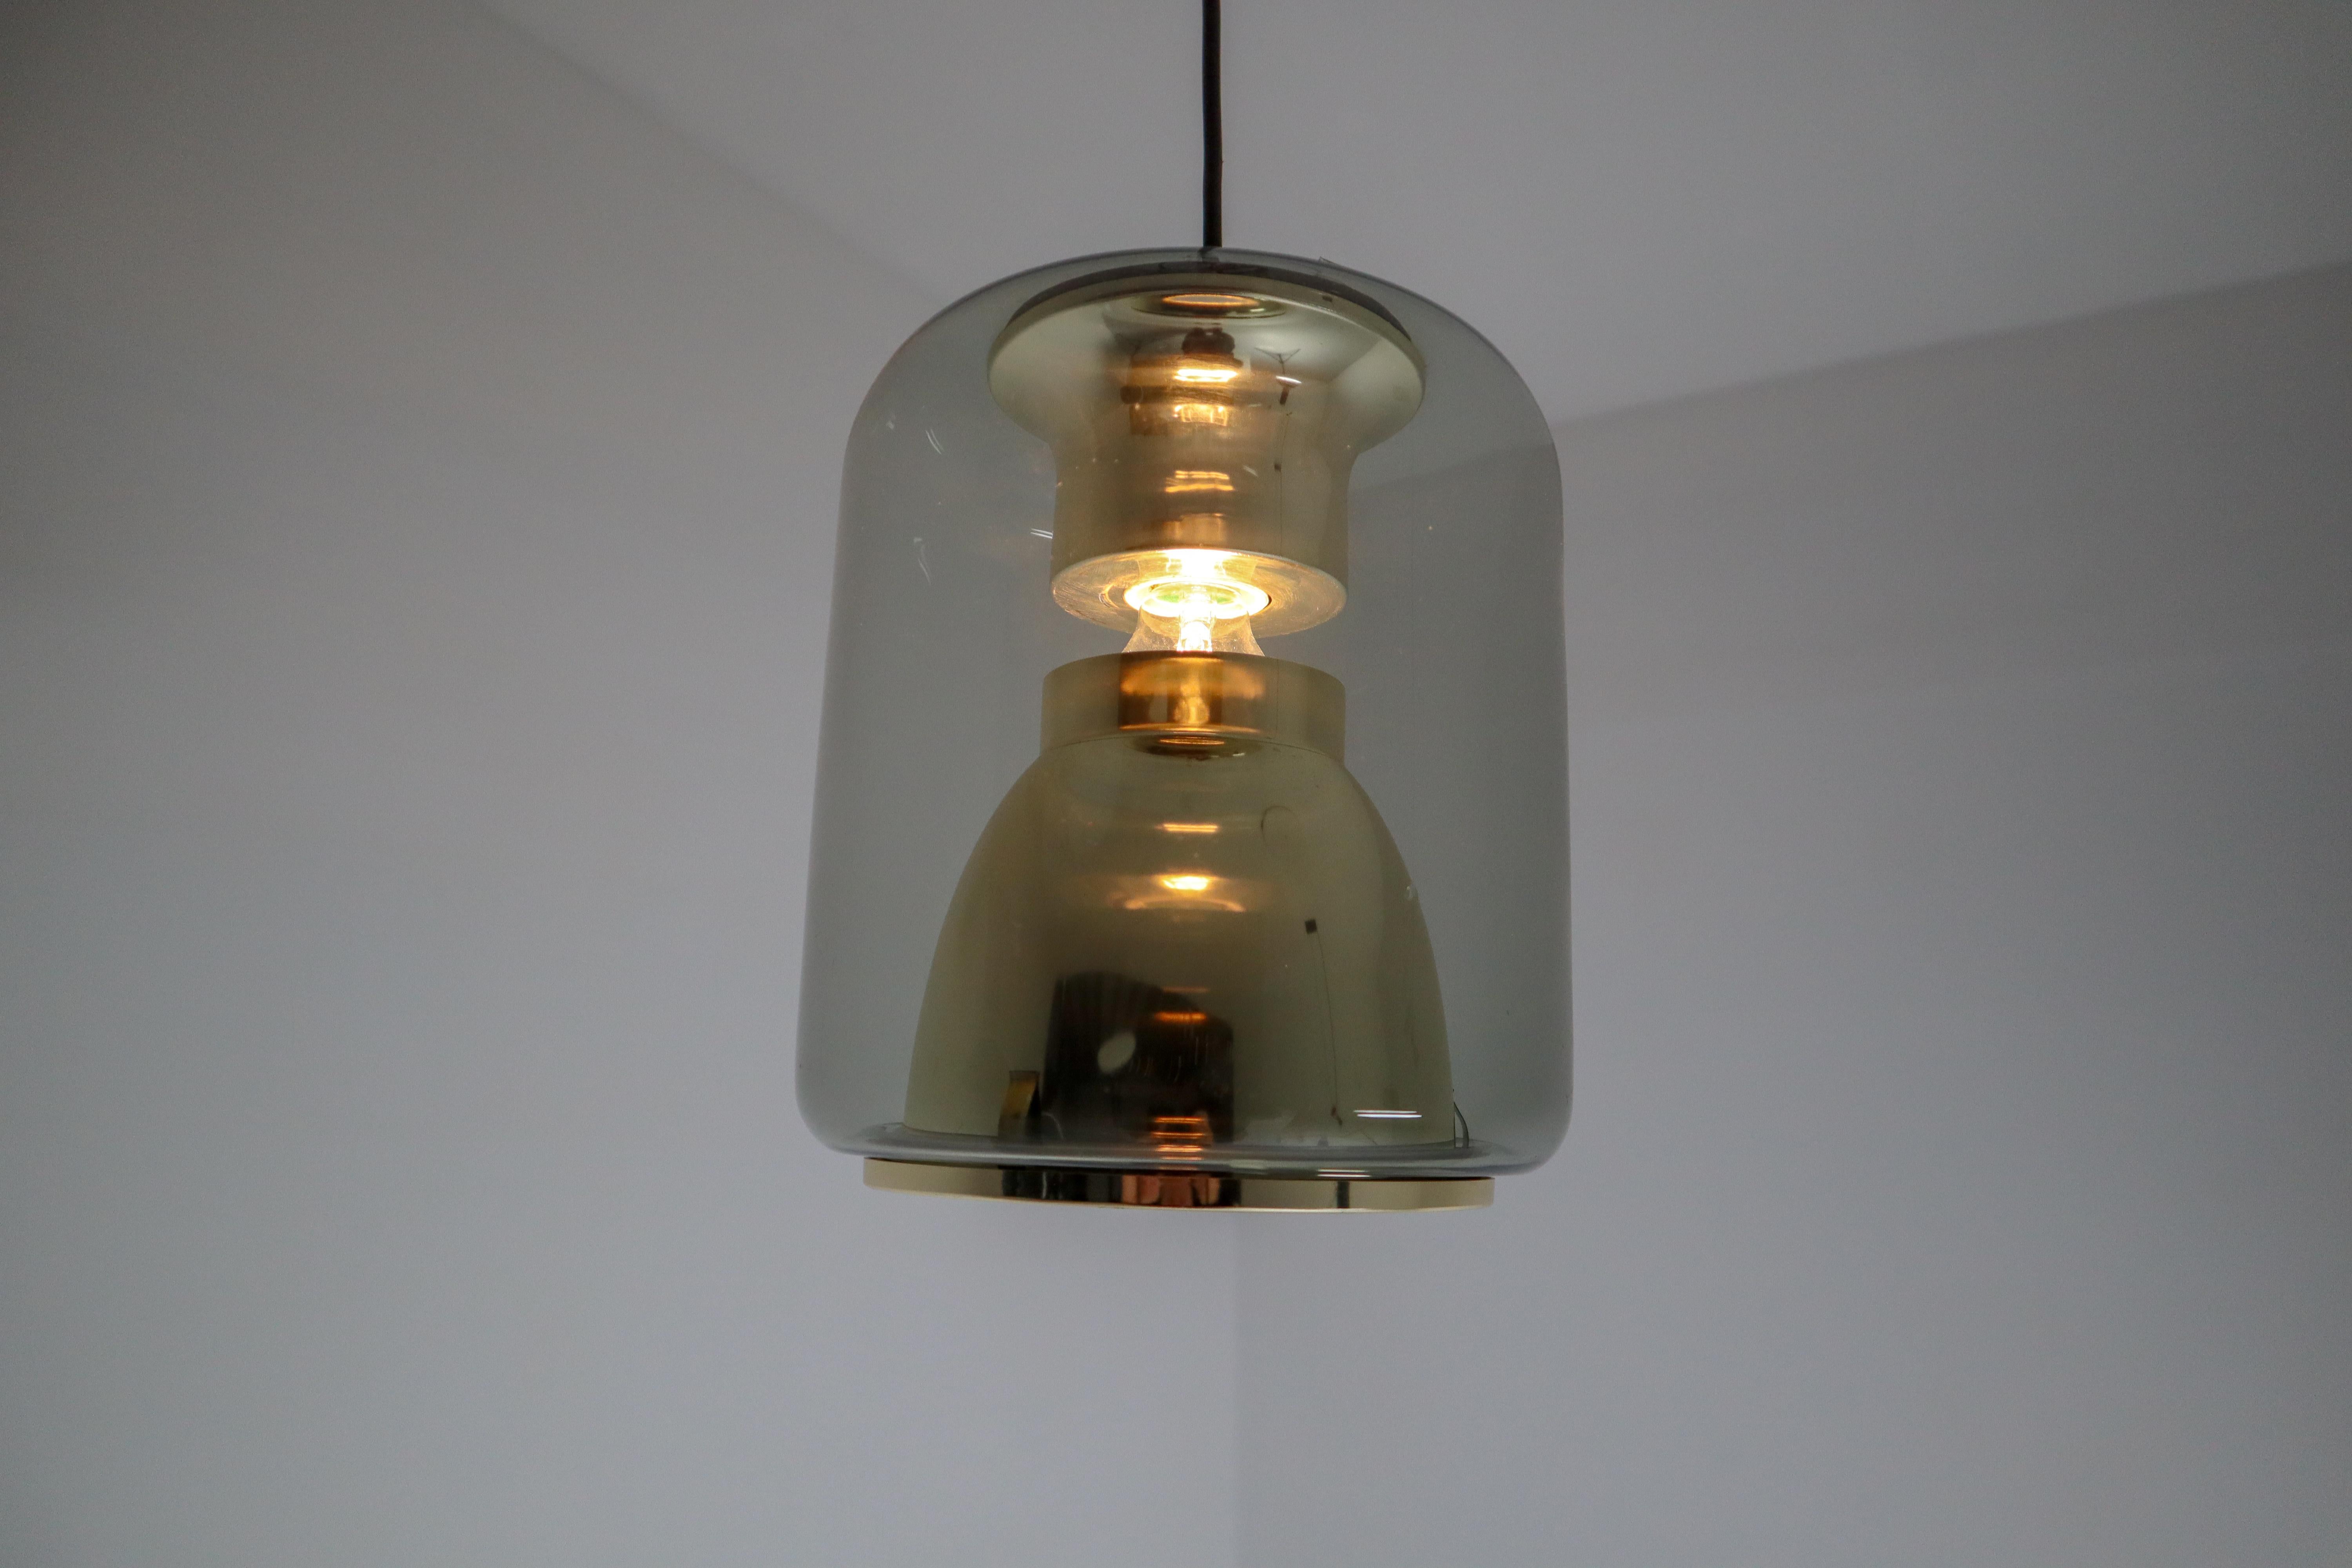 Vintage suspension lamp in smoked glass with golden details. Produced by ERCO, Germany, 1970s. Great space design for pleasant glare-free light downwards and to the sides. The frame inside is made of brass anodised aluminum. These lights will